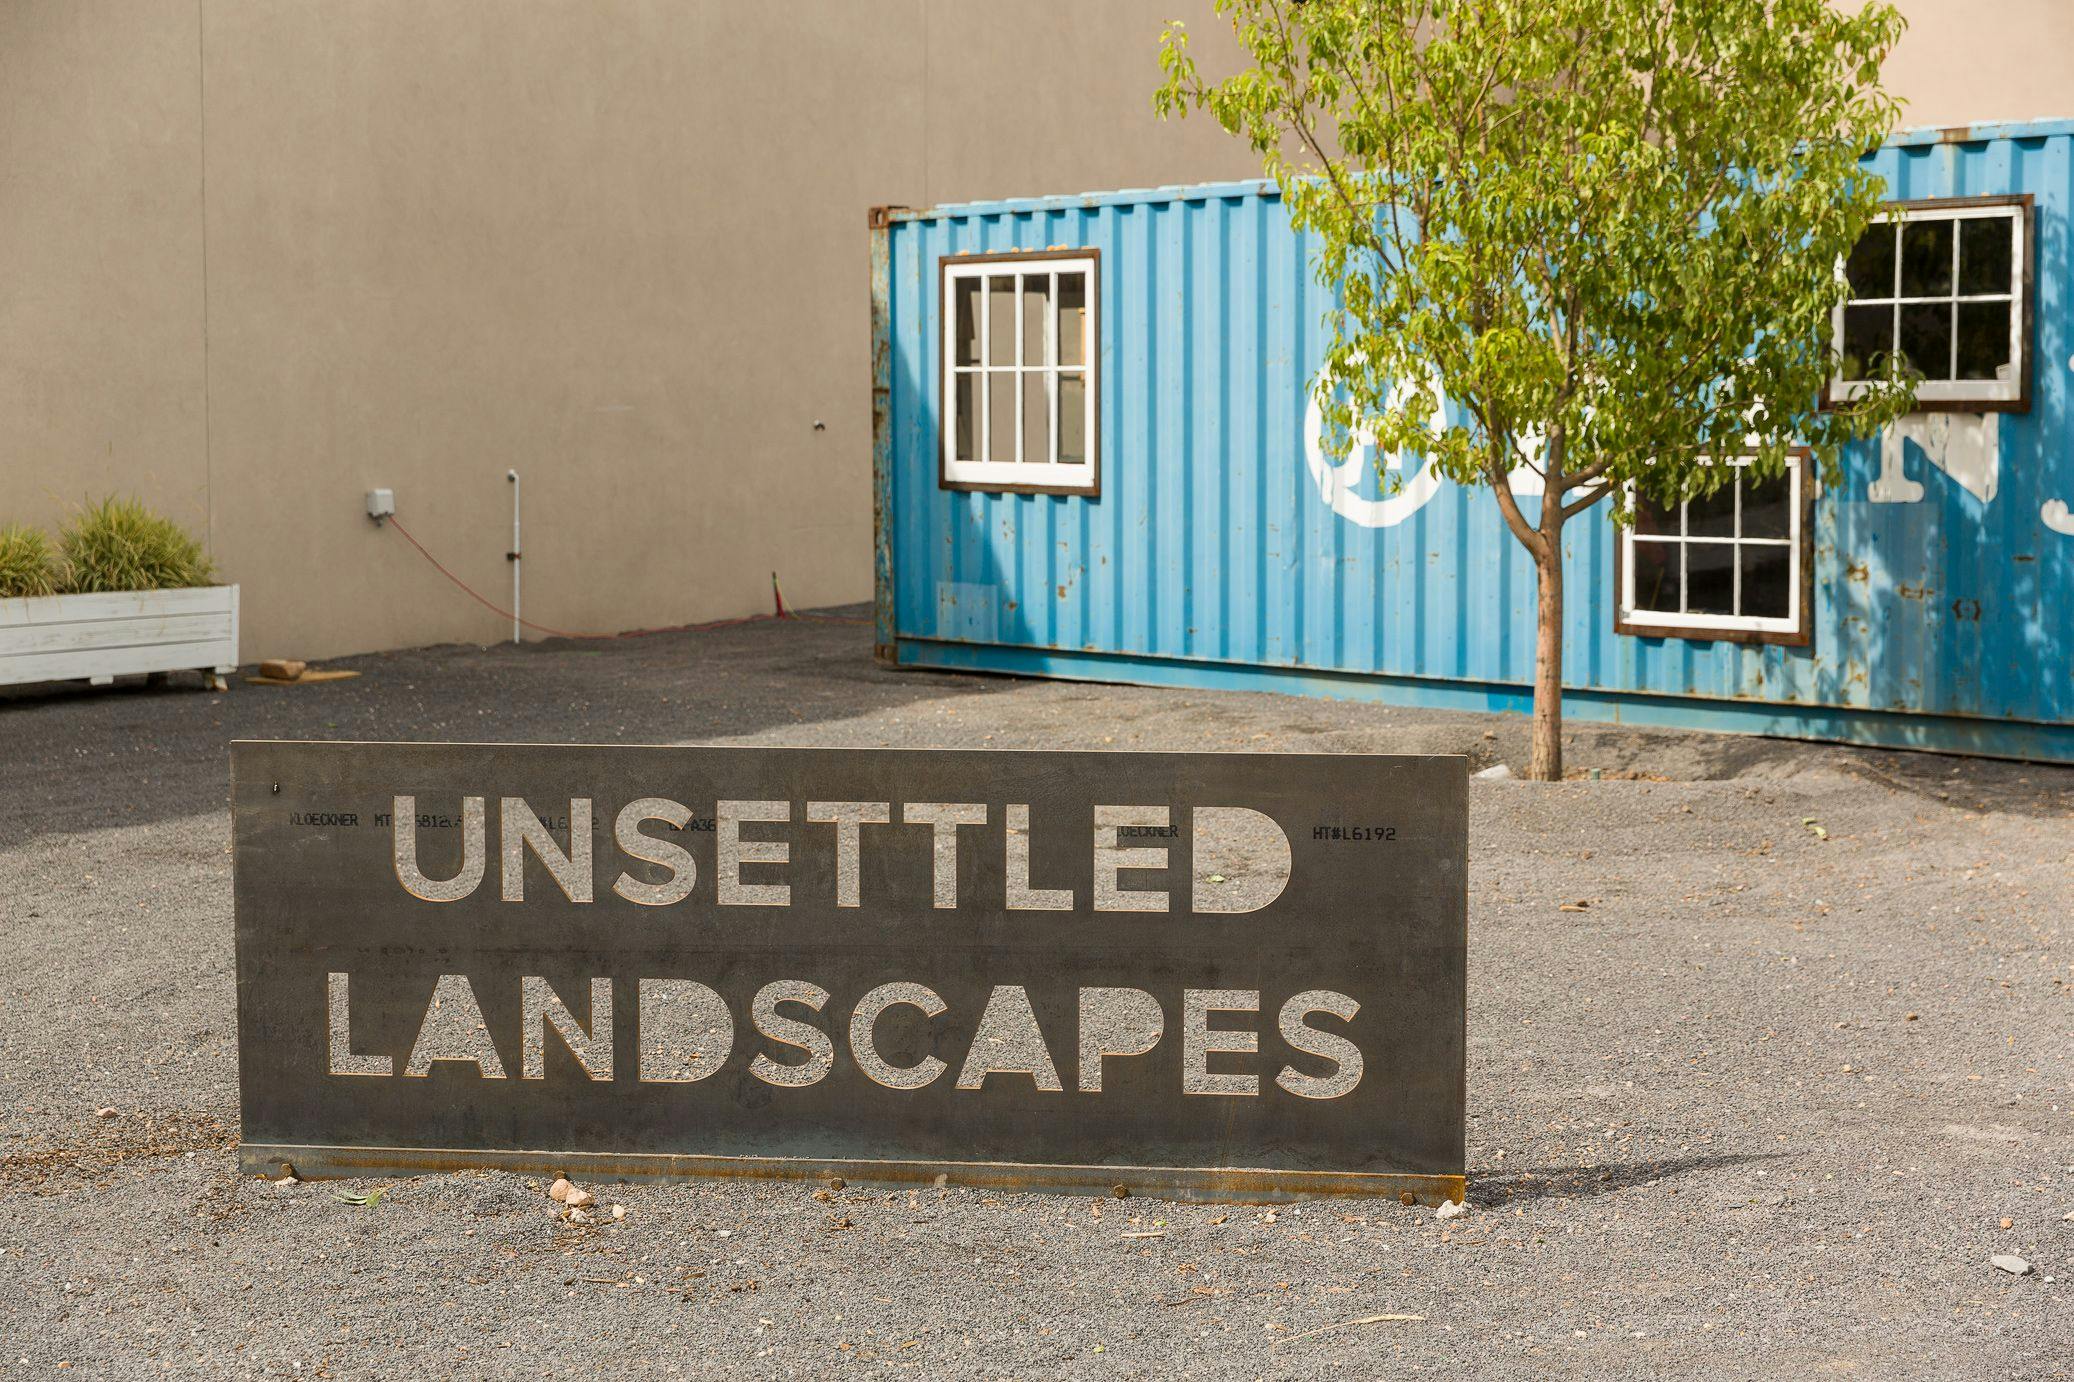 Off-site view, SITElines.2014: Unsettled Landscapes, SITE SANTA FE, 2014. Photo by Eric Swanson